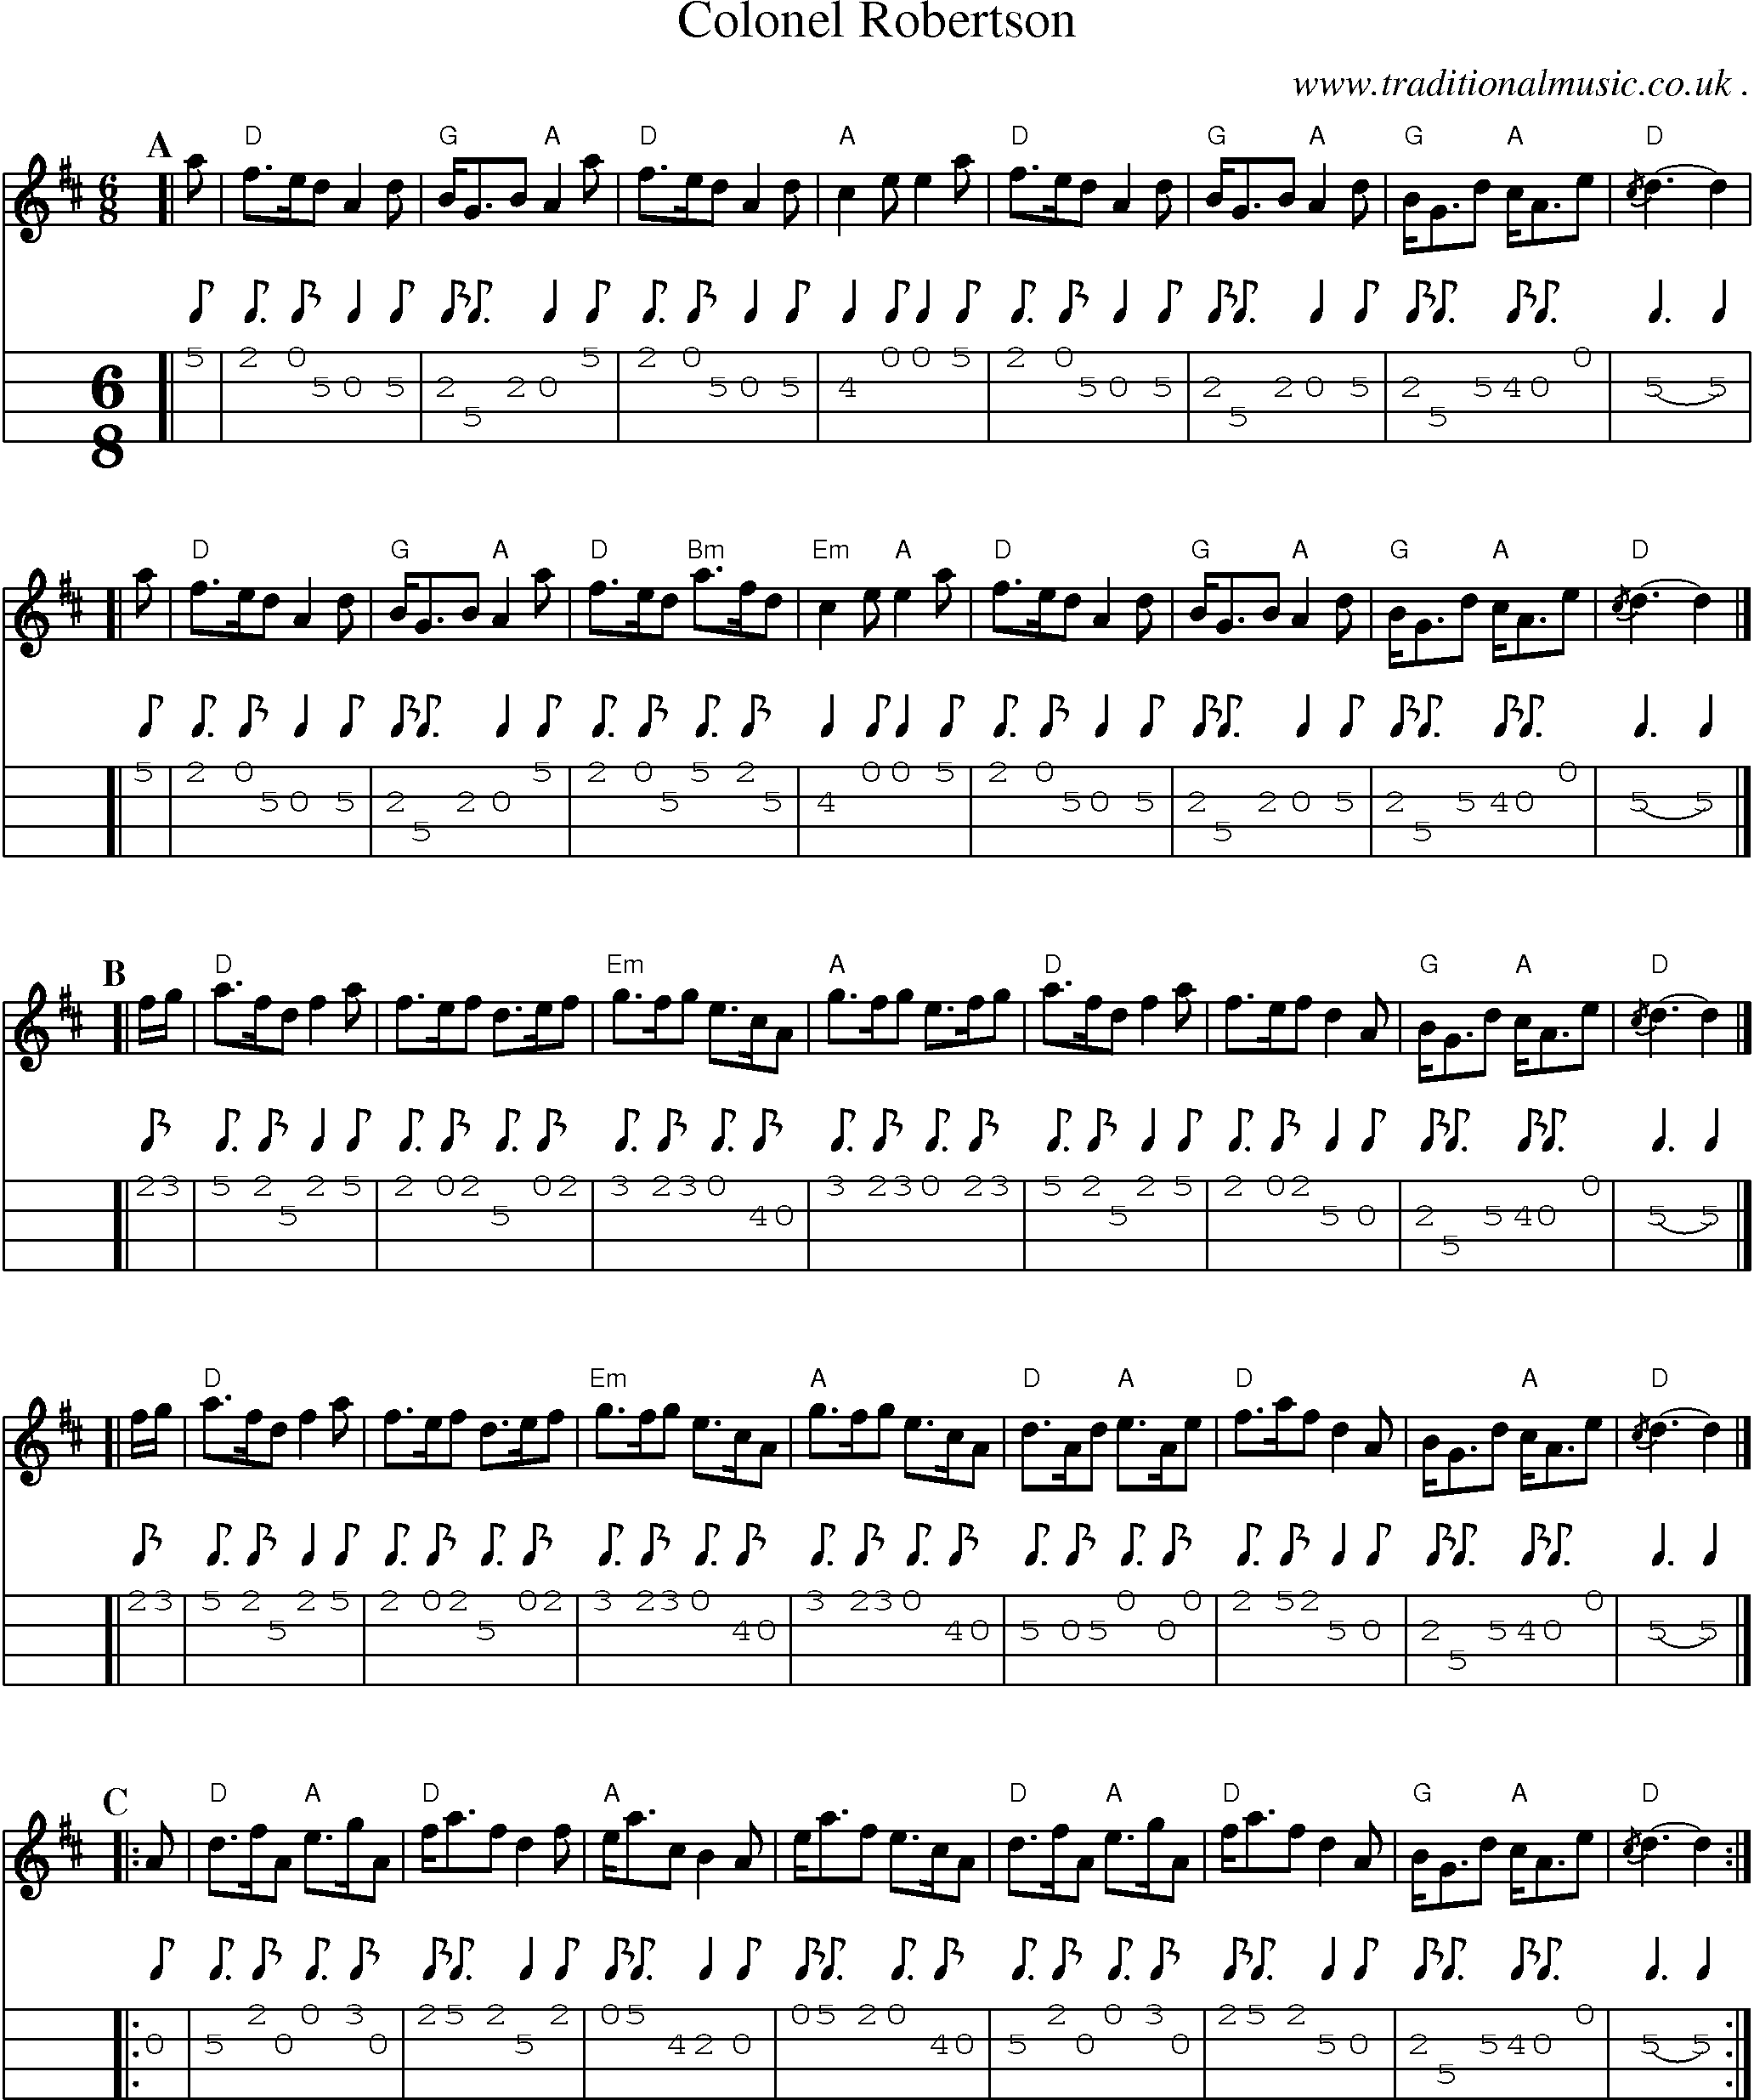 Sheet-music  score, Chords and Mandolin Tabs for Colonel Robertson